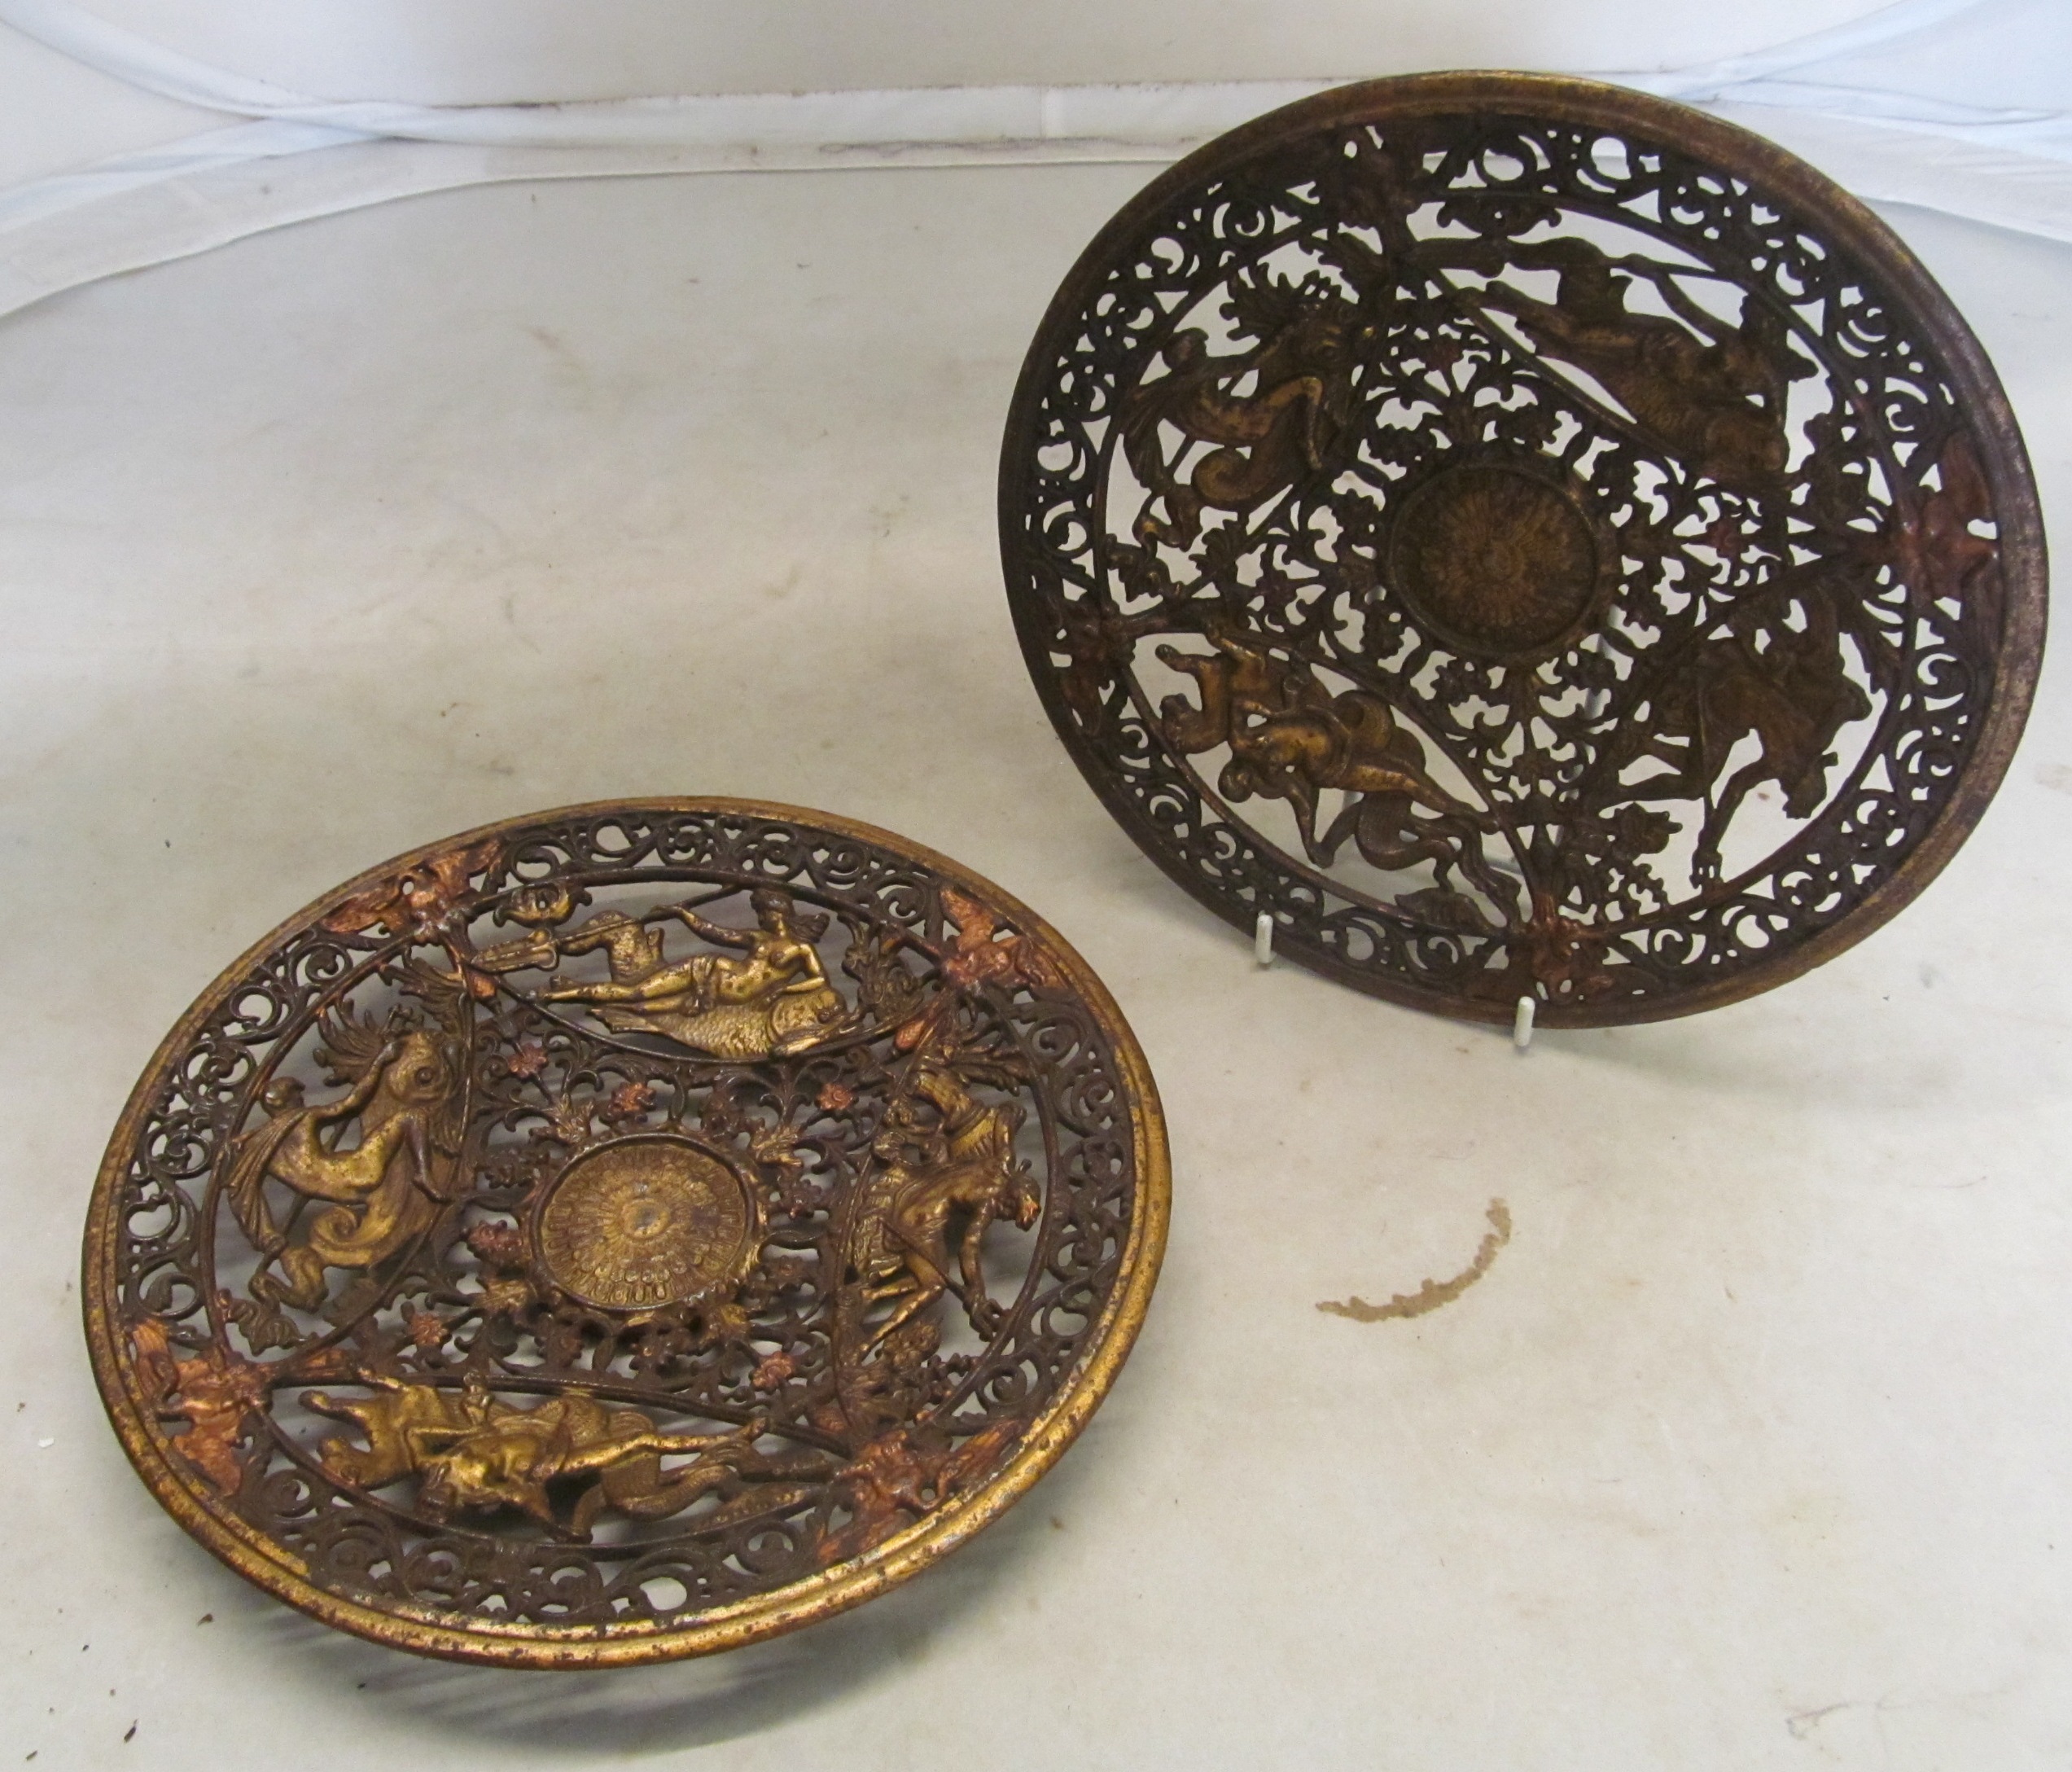 A pair of gilt metal pierced Coalbrookedale style dishes with design of classical figures on